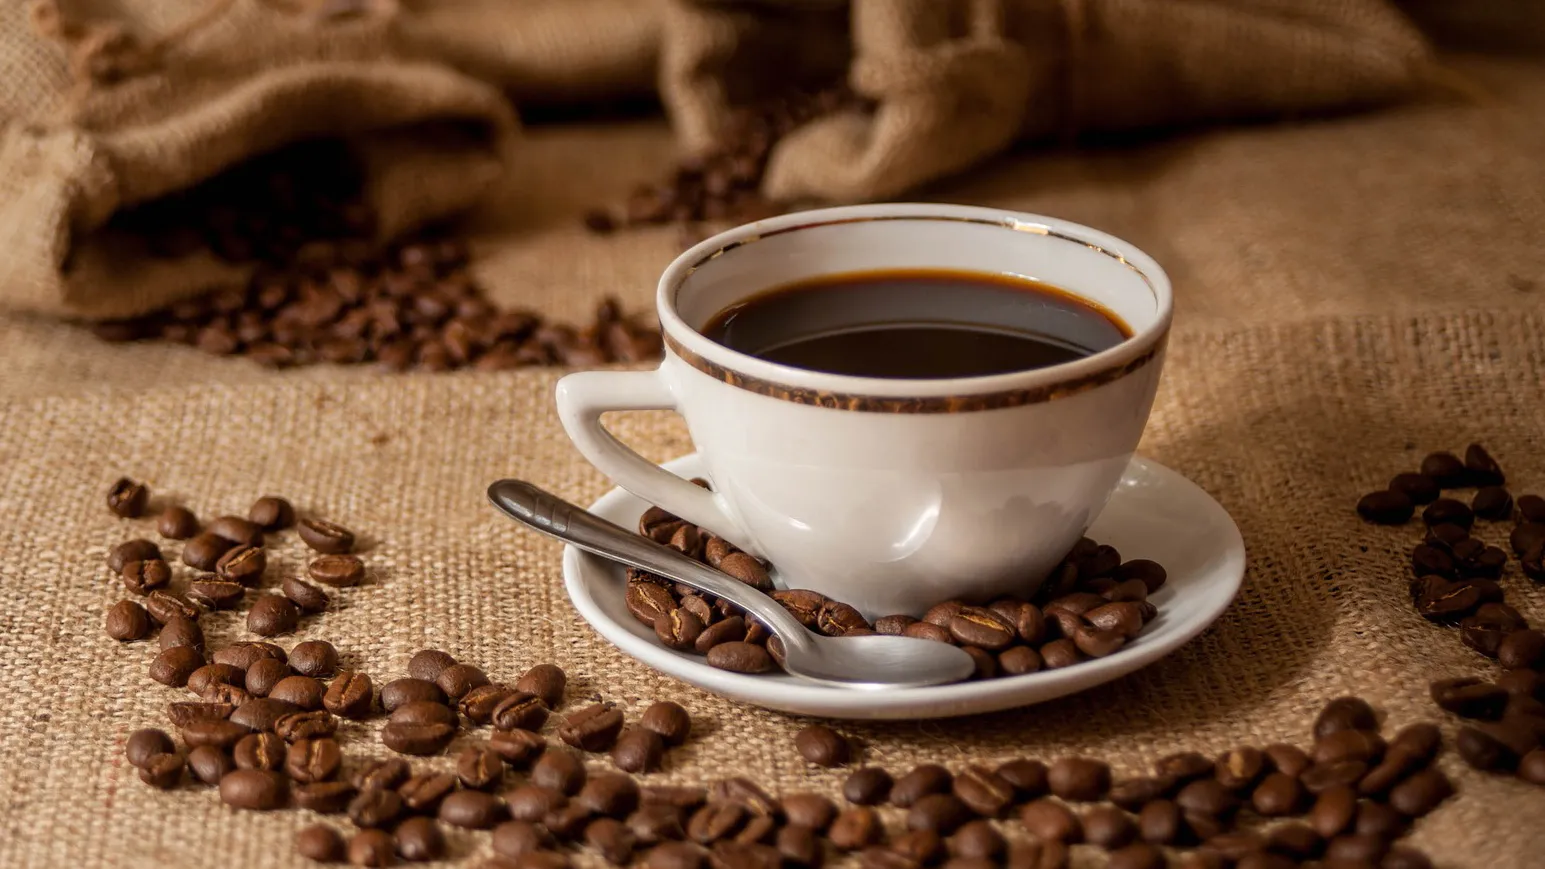 What Are the Health Benefits of Drinking Brazil Coffee?